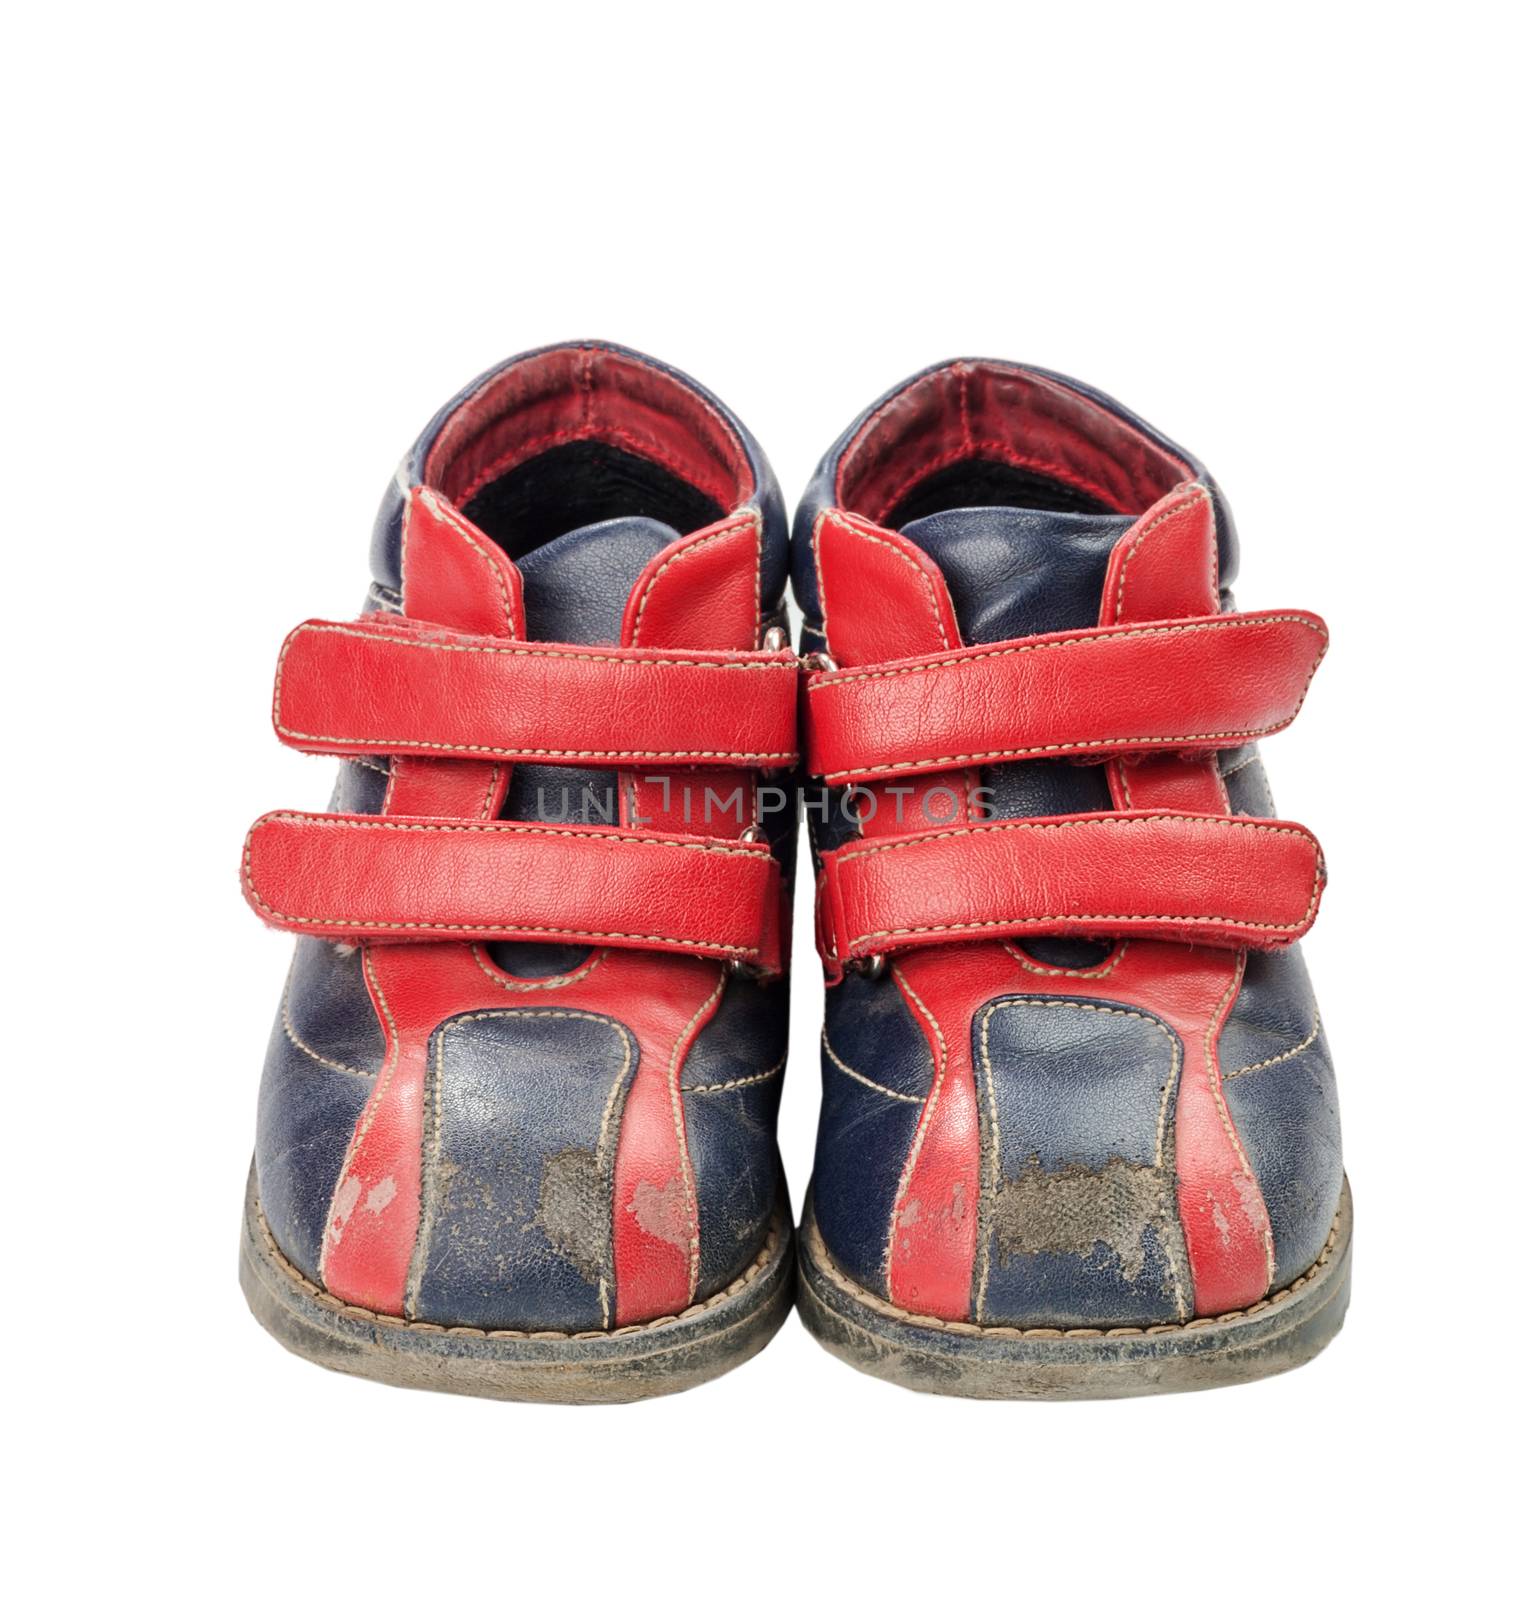 Used red-blue child shoes isolated on white